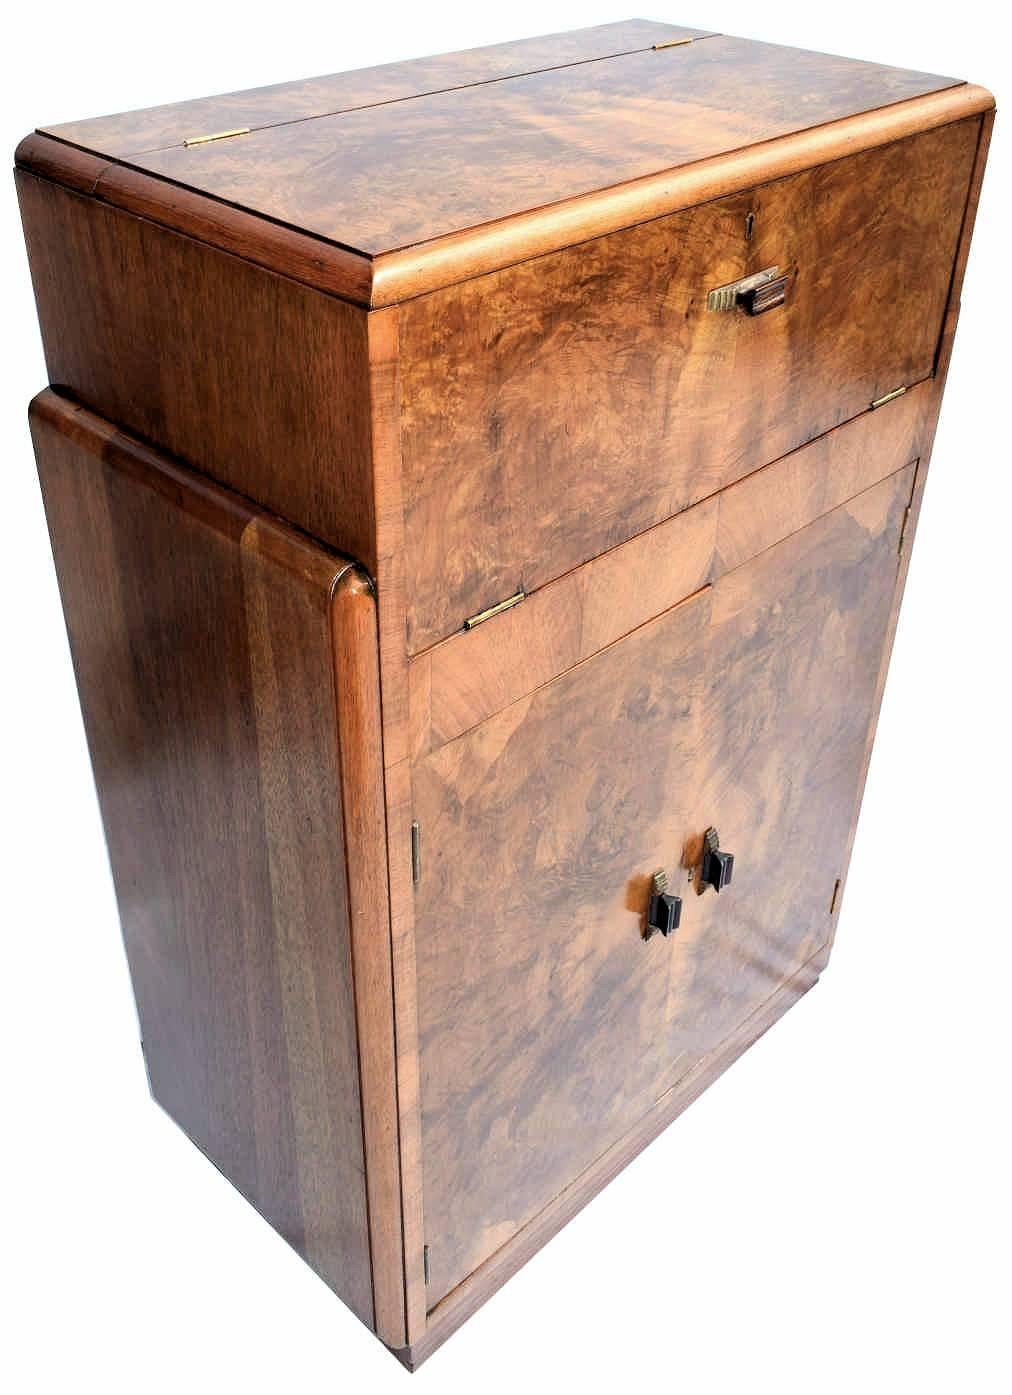 20th Century English Art Deco Fitted Burr Walnut Cocktail Cabinet or Dry Bar